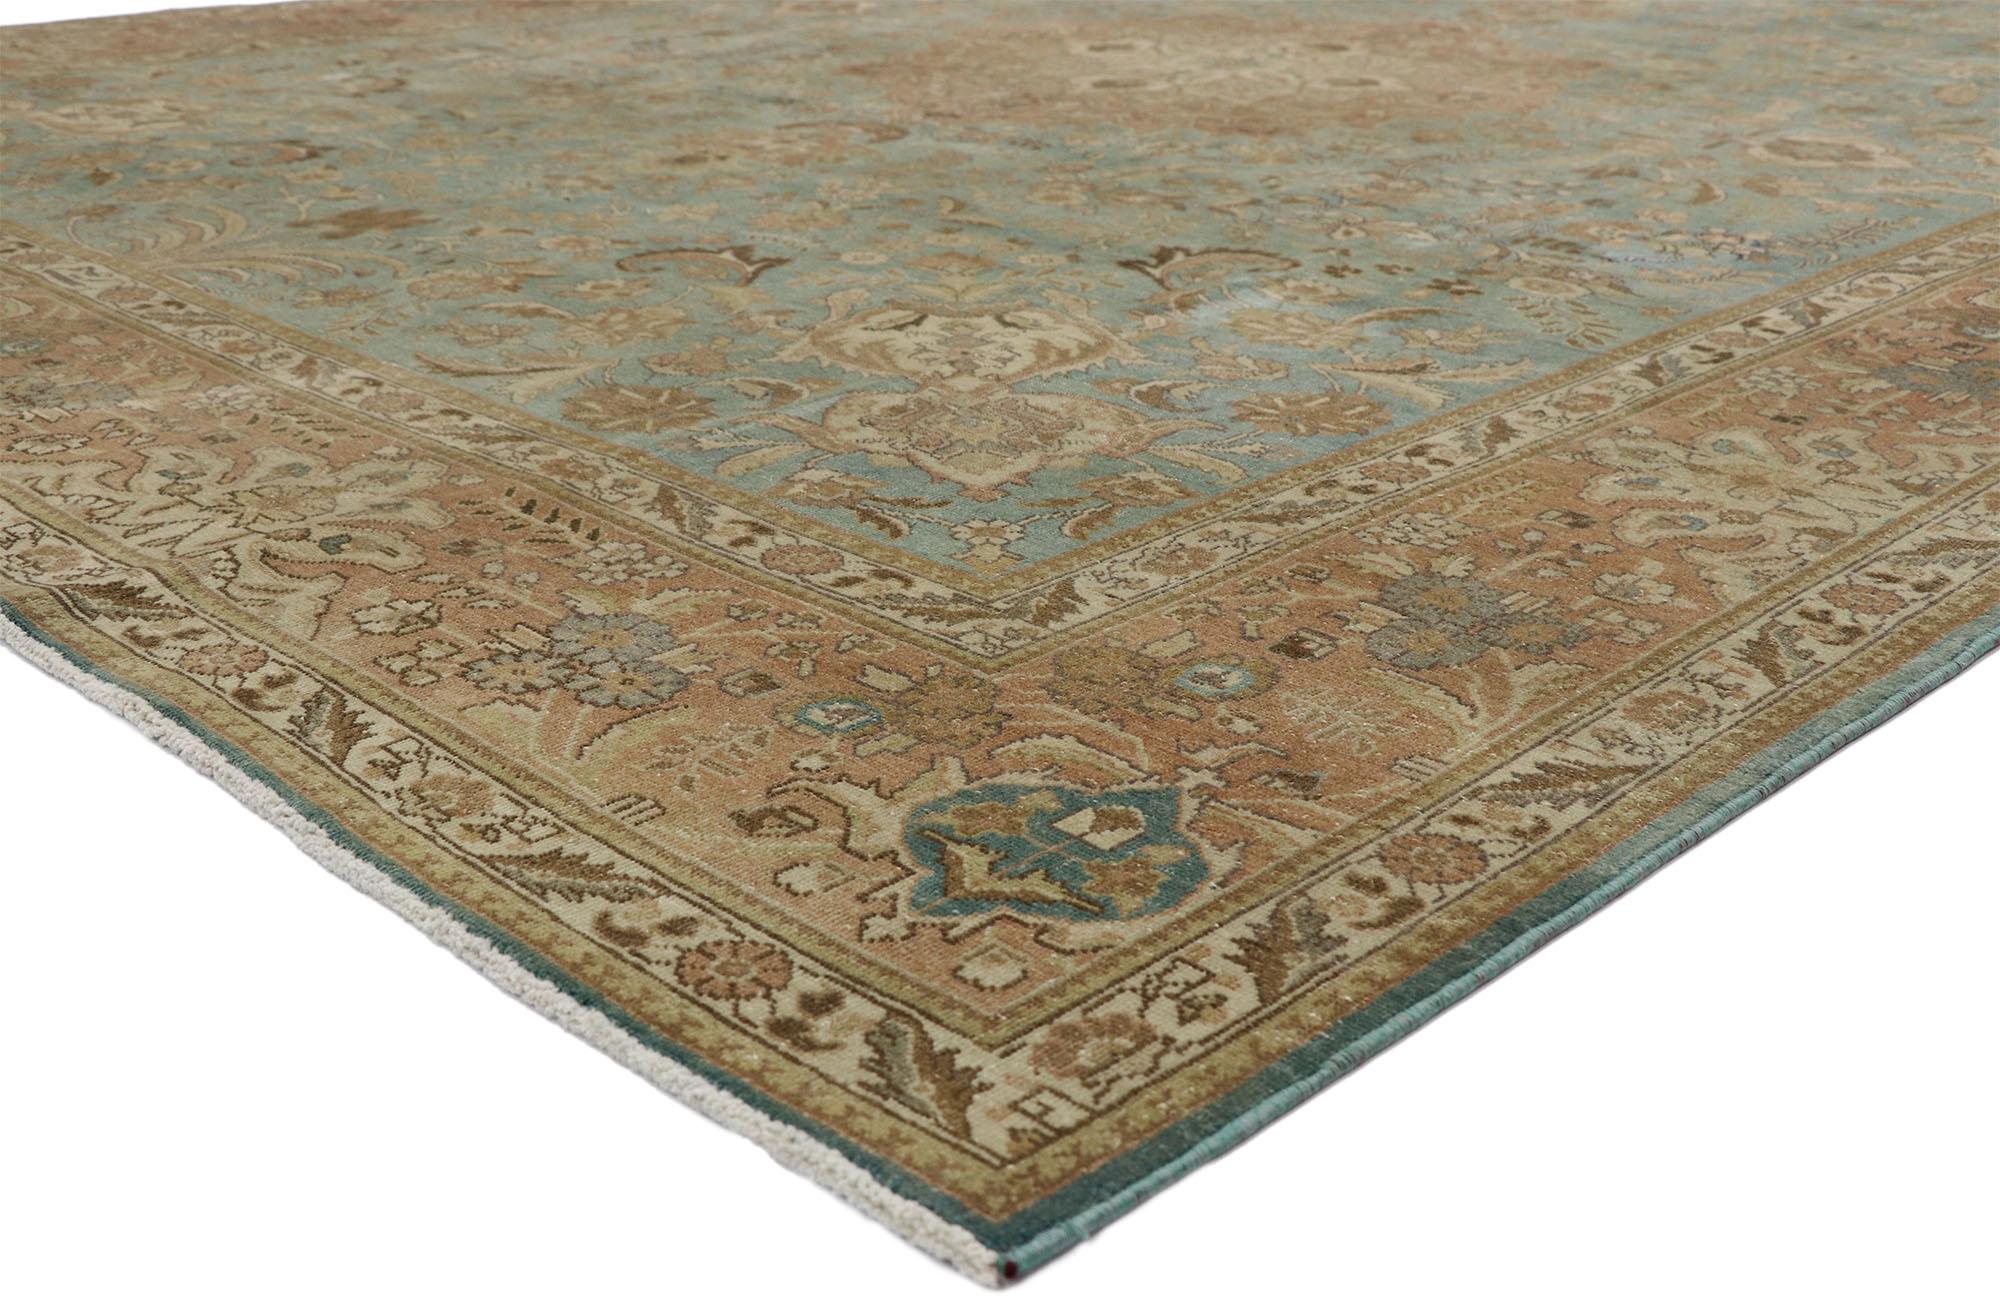 52664 Distressed Vintage Tabriz Rug with Gustavian Style 09'09 x 12'07. The architectural elements of naturalistic forms and timeless elegance combined with Gustavian style, this hand knotted wool distressed vintage Turkish Tabriz rug astounds with